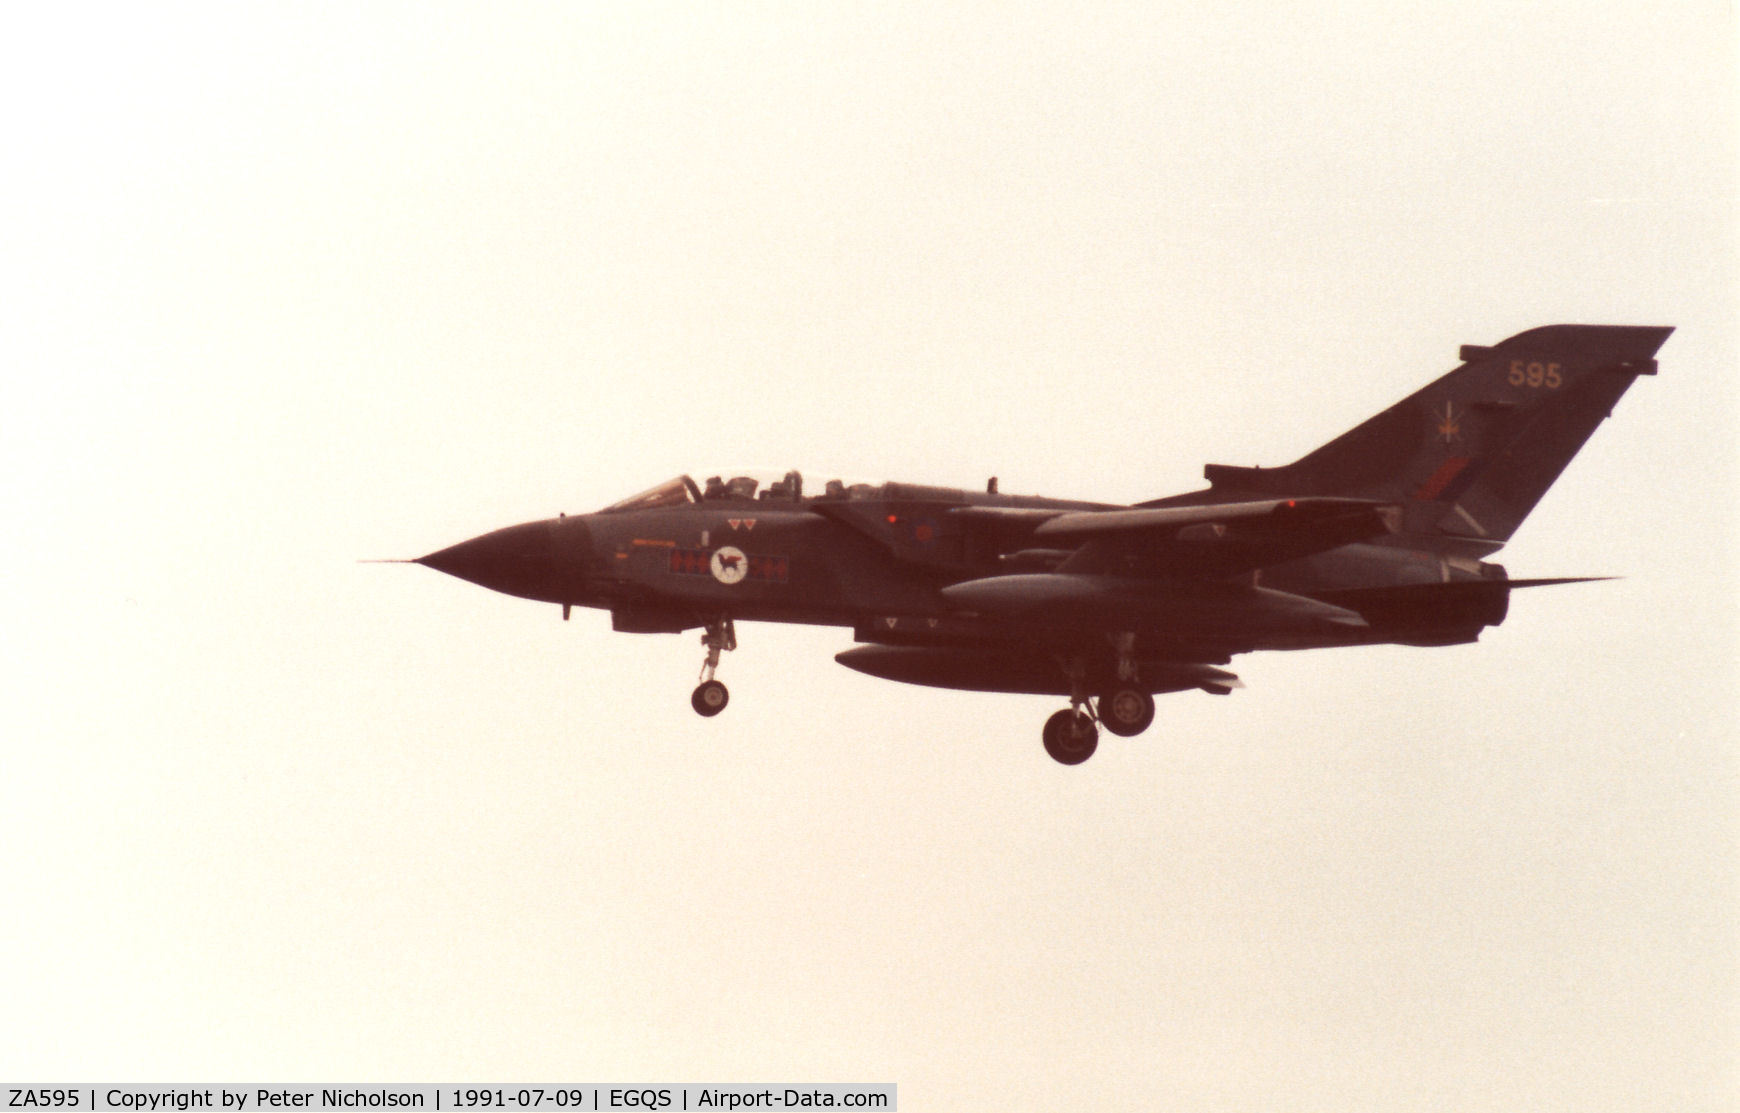 ZA595, 1982 Panavia Tornado GR.1 C/N 112/BT023/3059, Tornado GR.1, callsign Magnum 1, of RAF Honington's Tactical Weapons Conversion Unit on final approach to RAF Lossiemouth in the Summer of 1991.